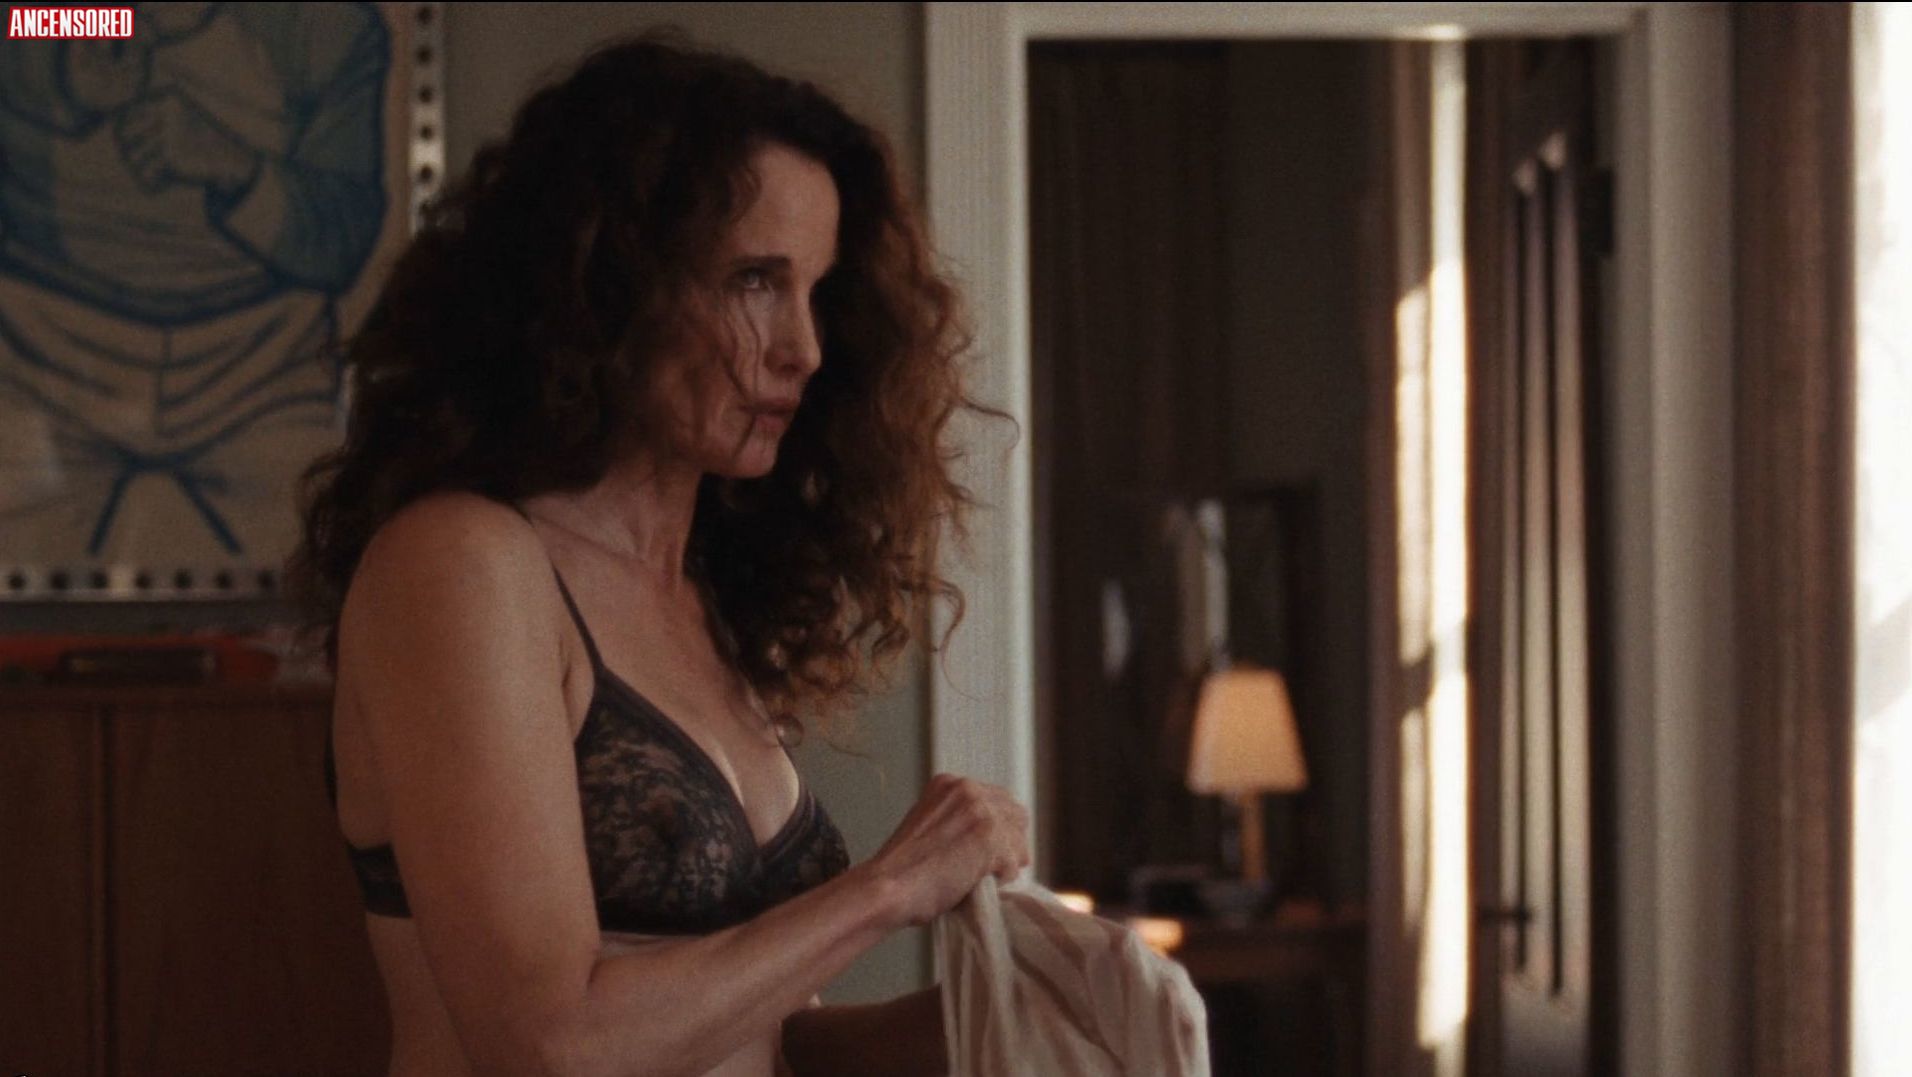 Andie macdowell nude pictures